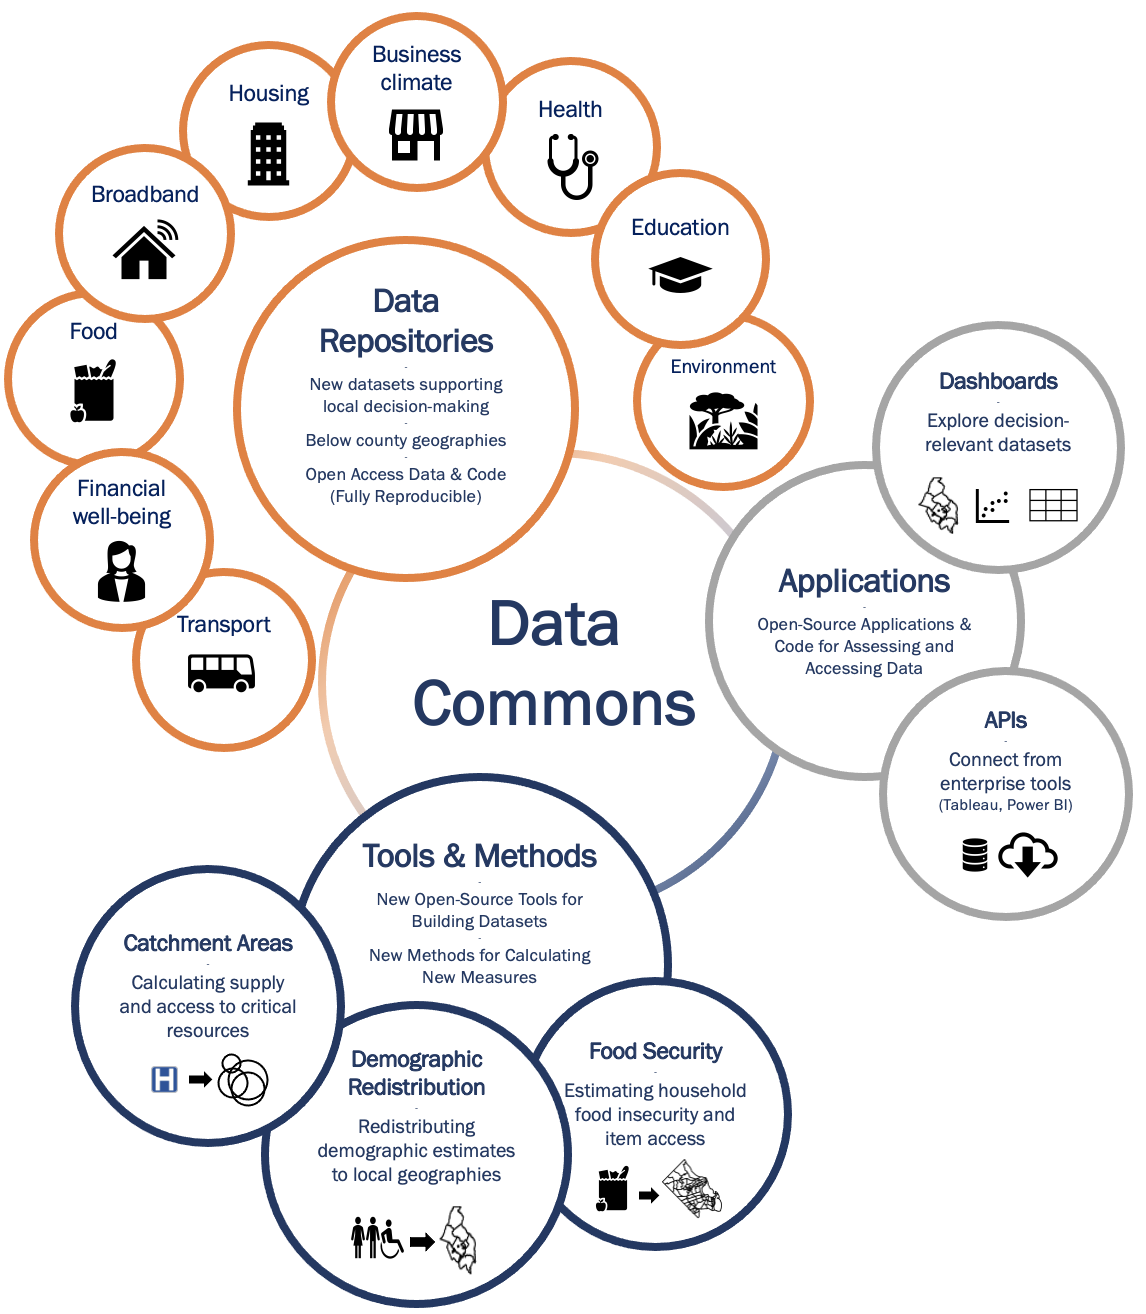 The Social Impact Data Commons framework developed by the University of Virginia Biocomplexity Institute, Social and Decision Analytics Division